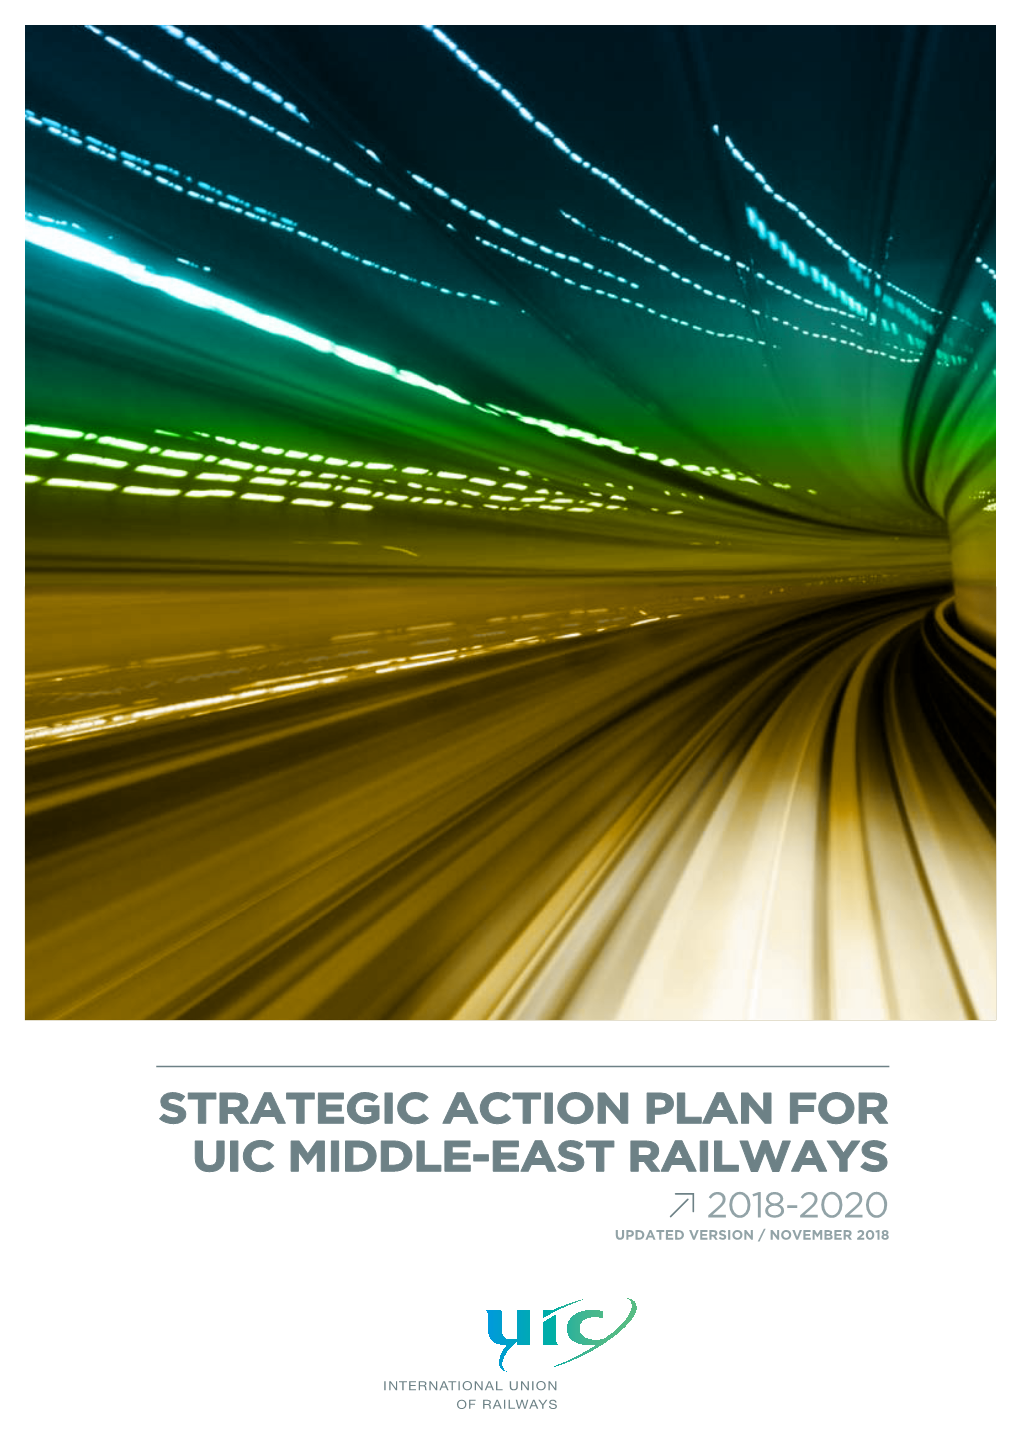 STRATEGIC ACTION PLAN for UIC MIDDLE-EAST RAILWAYS 2018-2020 Updated Version / November 2018 Contents